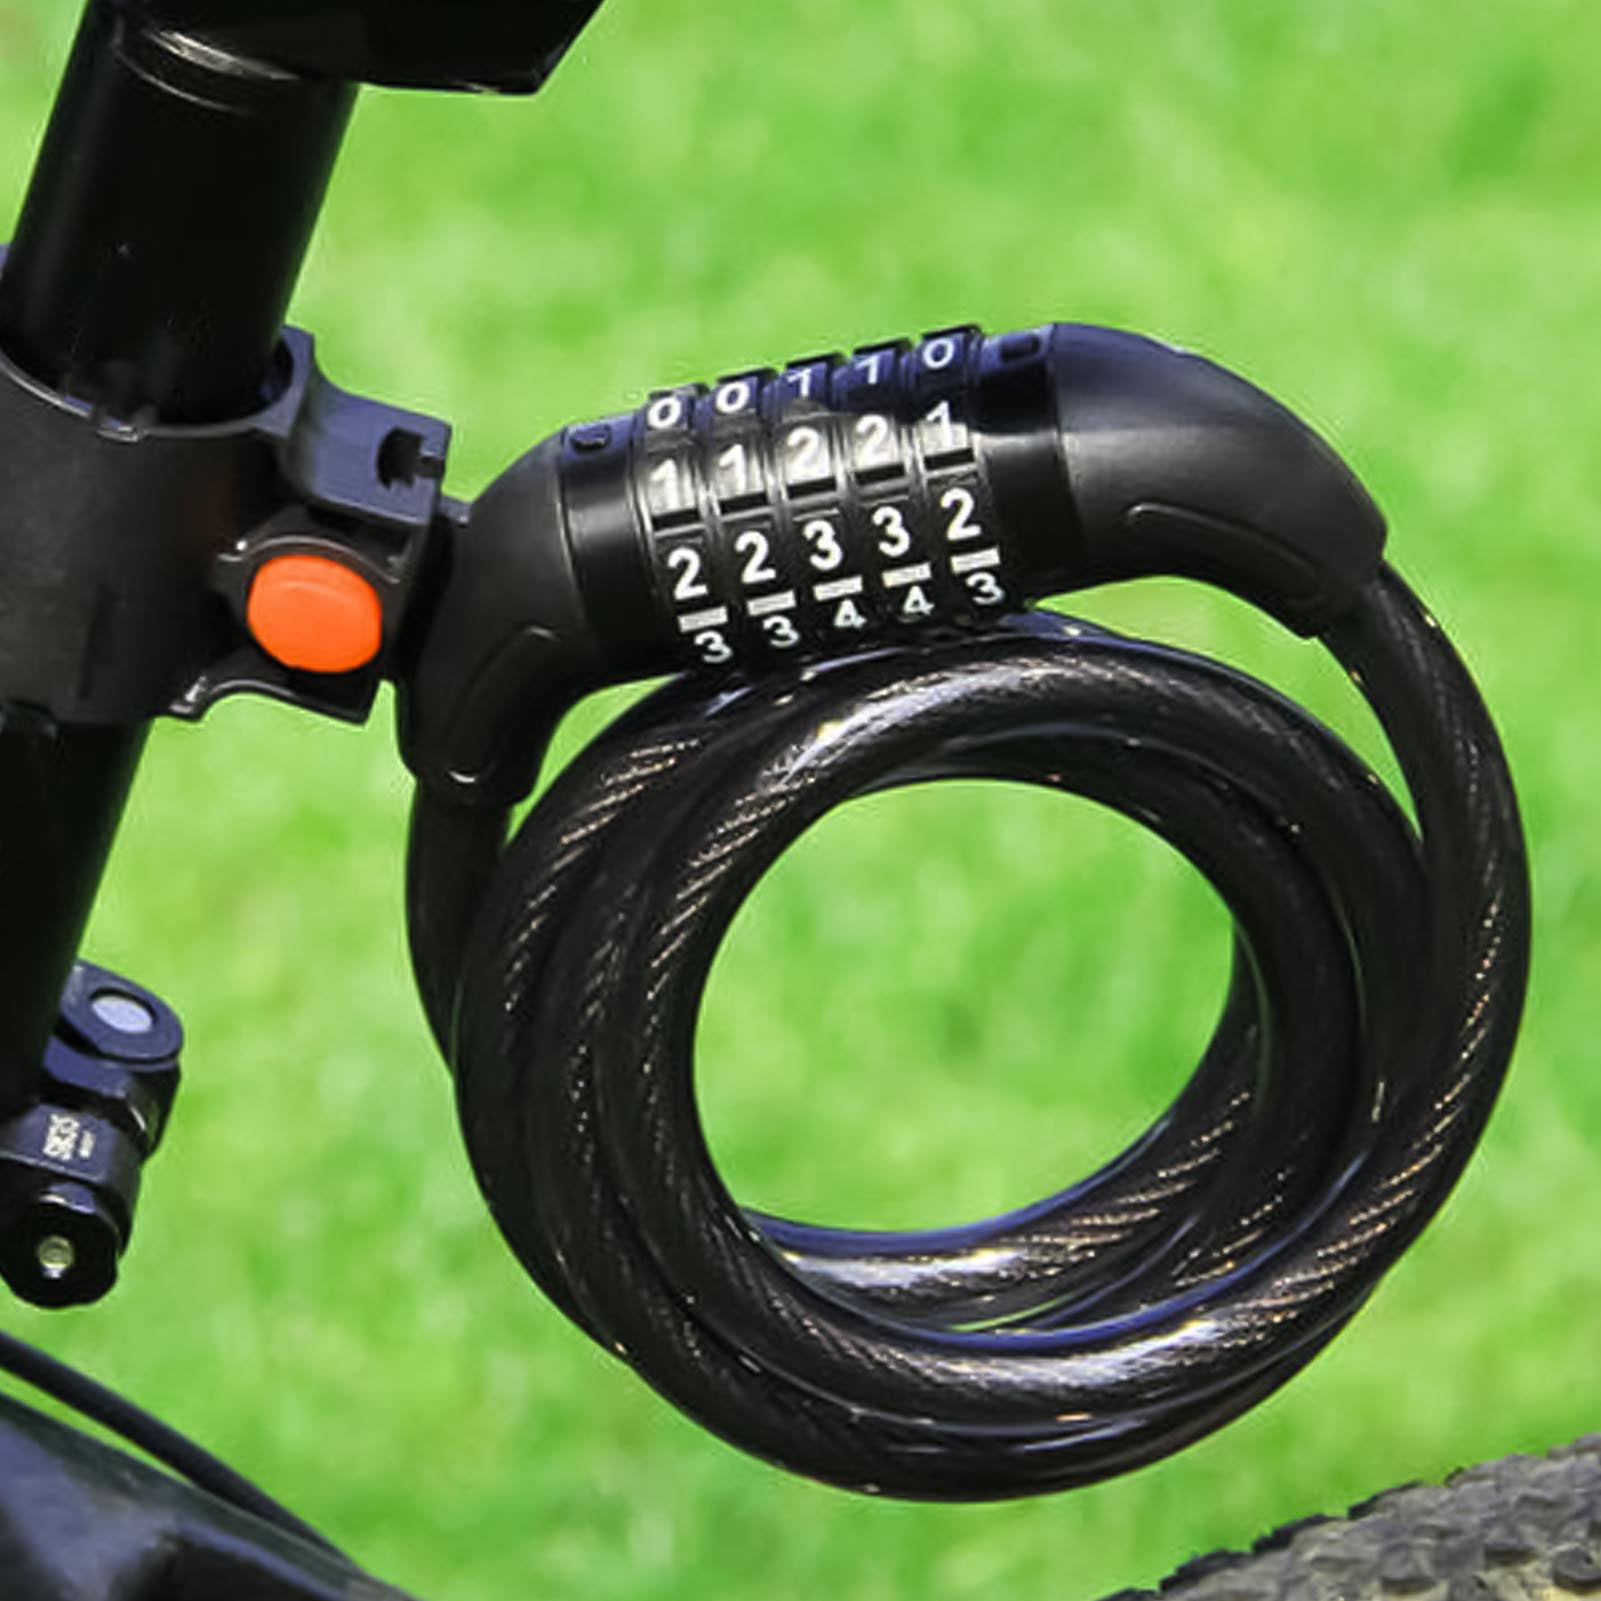 childrens bicycles Zengyuan Bicycle code lock 5 digit combination password Steel wire shear 1.2 meters Suitable for mountain bikes road bikes etc.